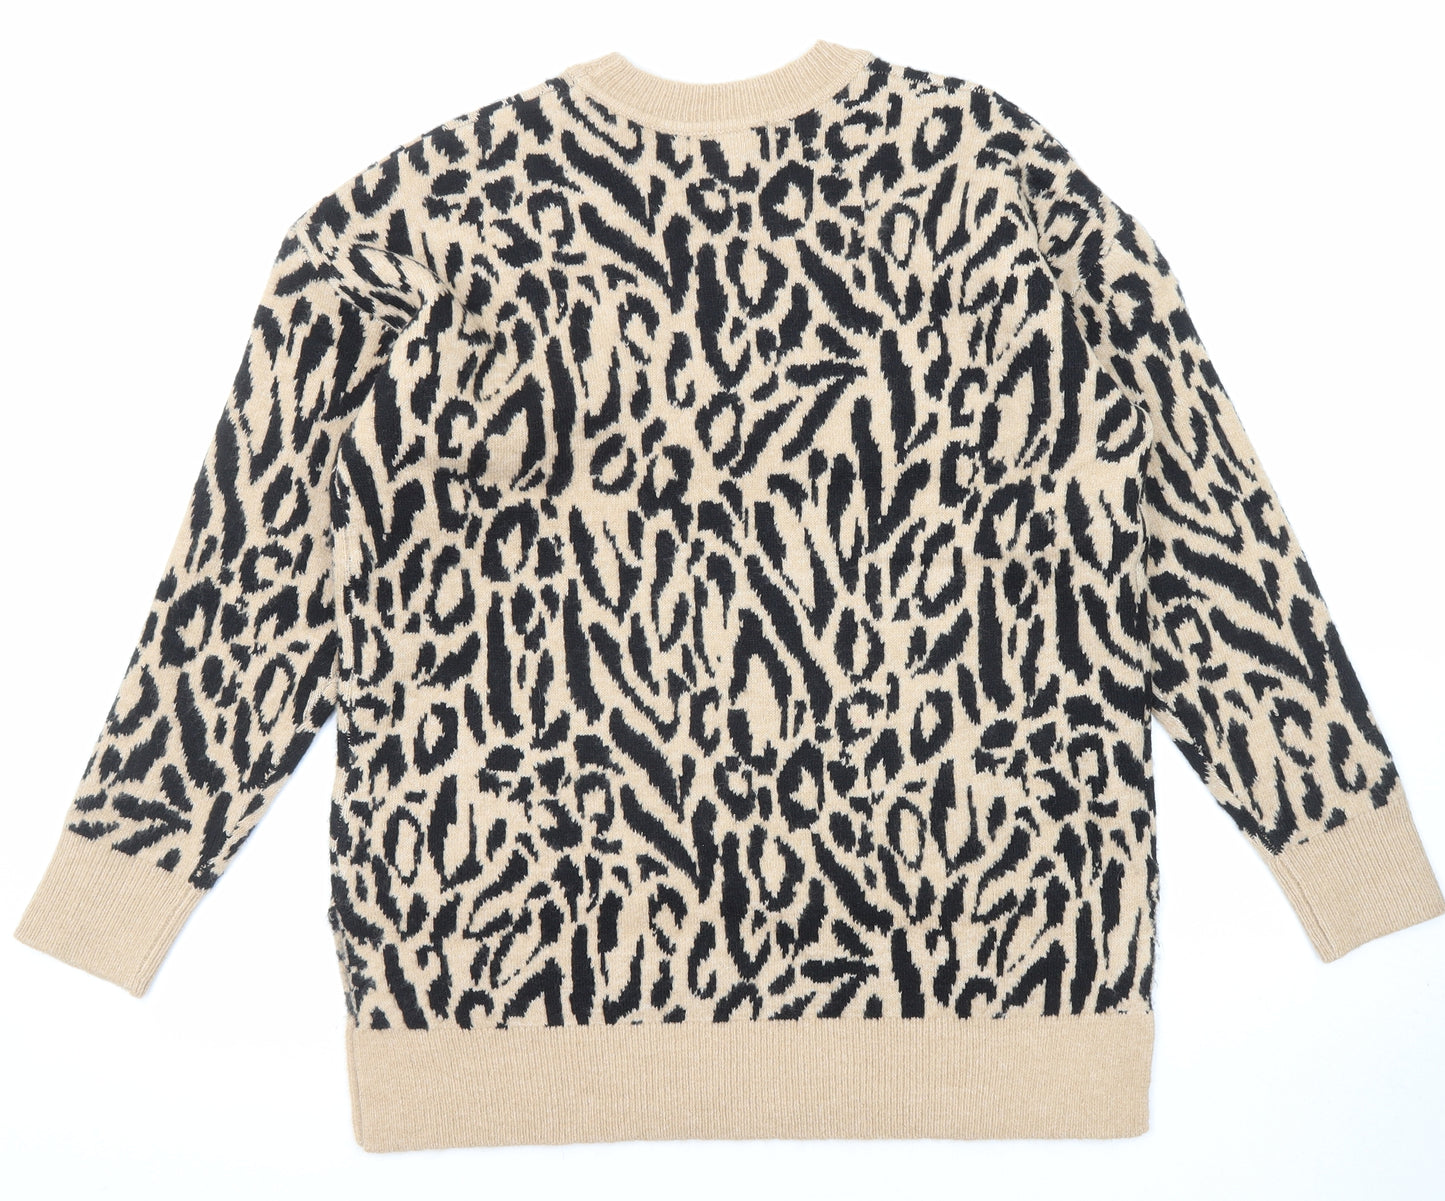 New Look Womens Beige Crew Neck Animal Print Acrylic Pullover Jumper Size S - Leopard Print